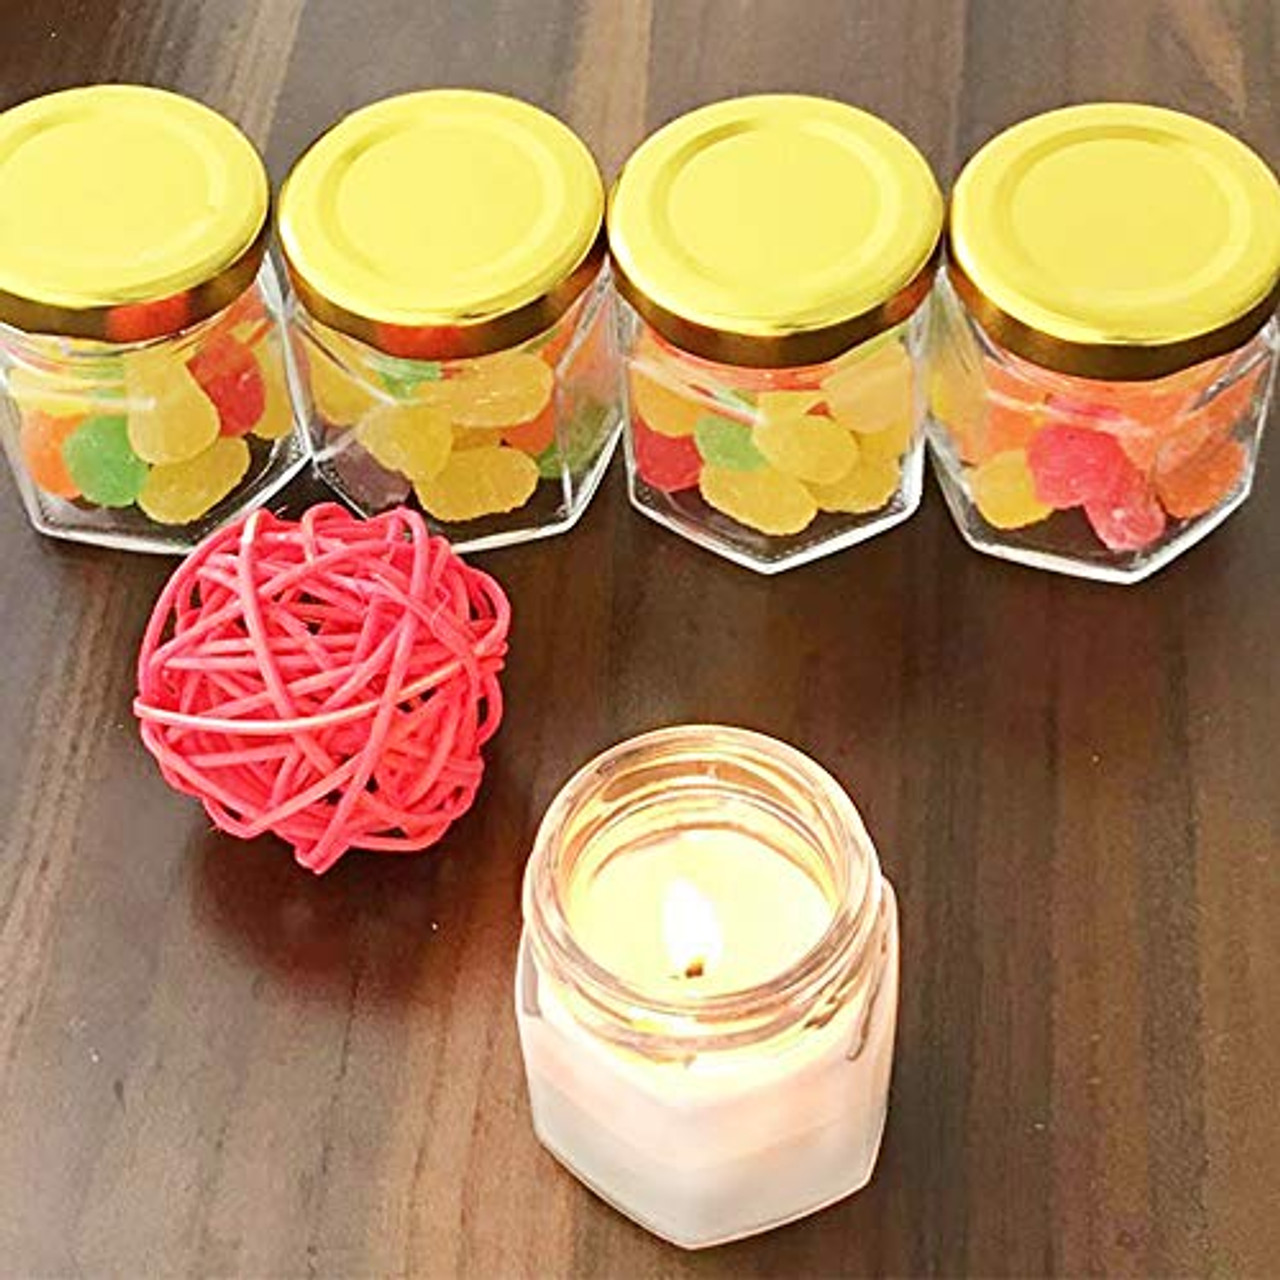 Superlele 30pcs 1.5oz Hexagon Mini Glass Jars with Gold Lids, Honey Jars  Small Spice Jars For Herbs with 80pcs Stickers, 2pcs Brush for Spices,  Gifts, Wedding Party Favors, DIY